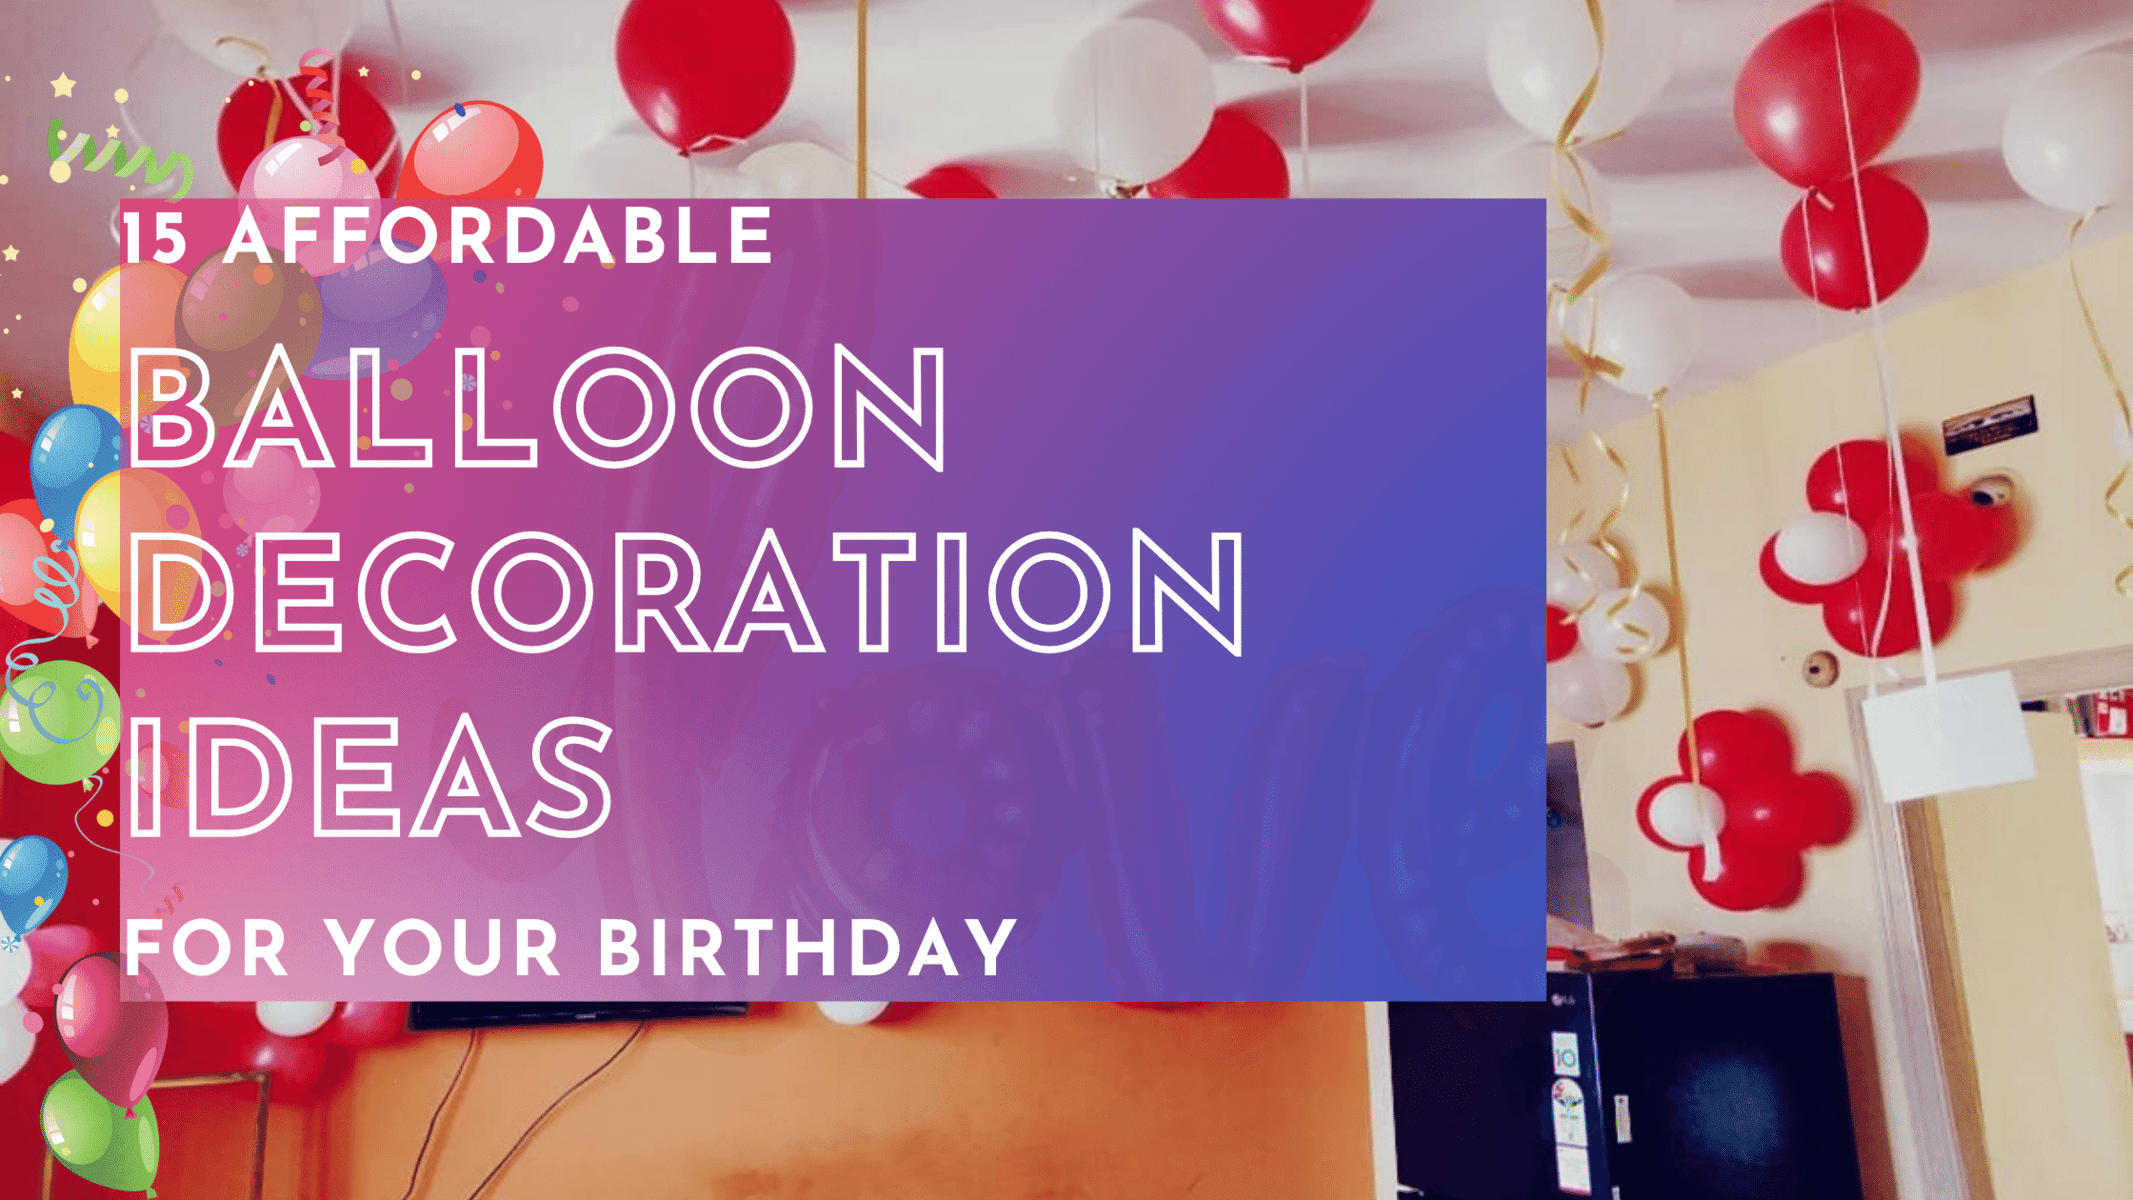 15 Affordable Balloon Decoration Ideas for Your Birthday